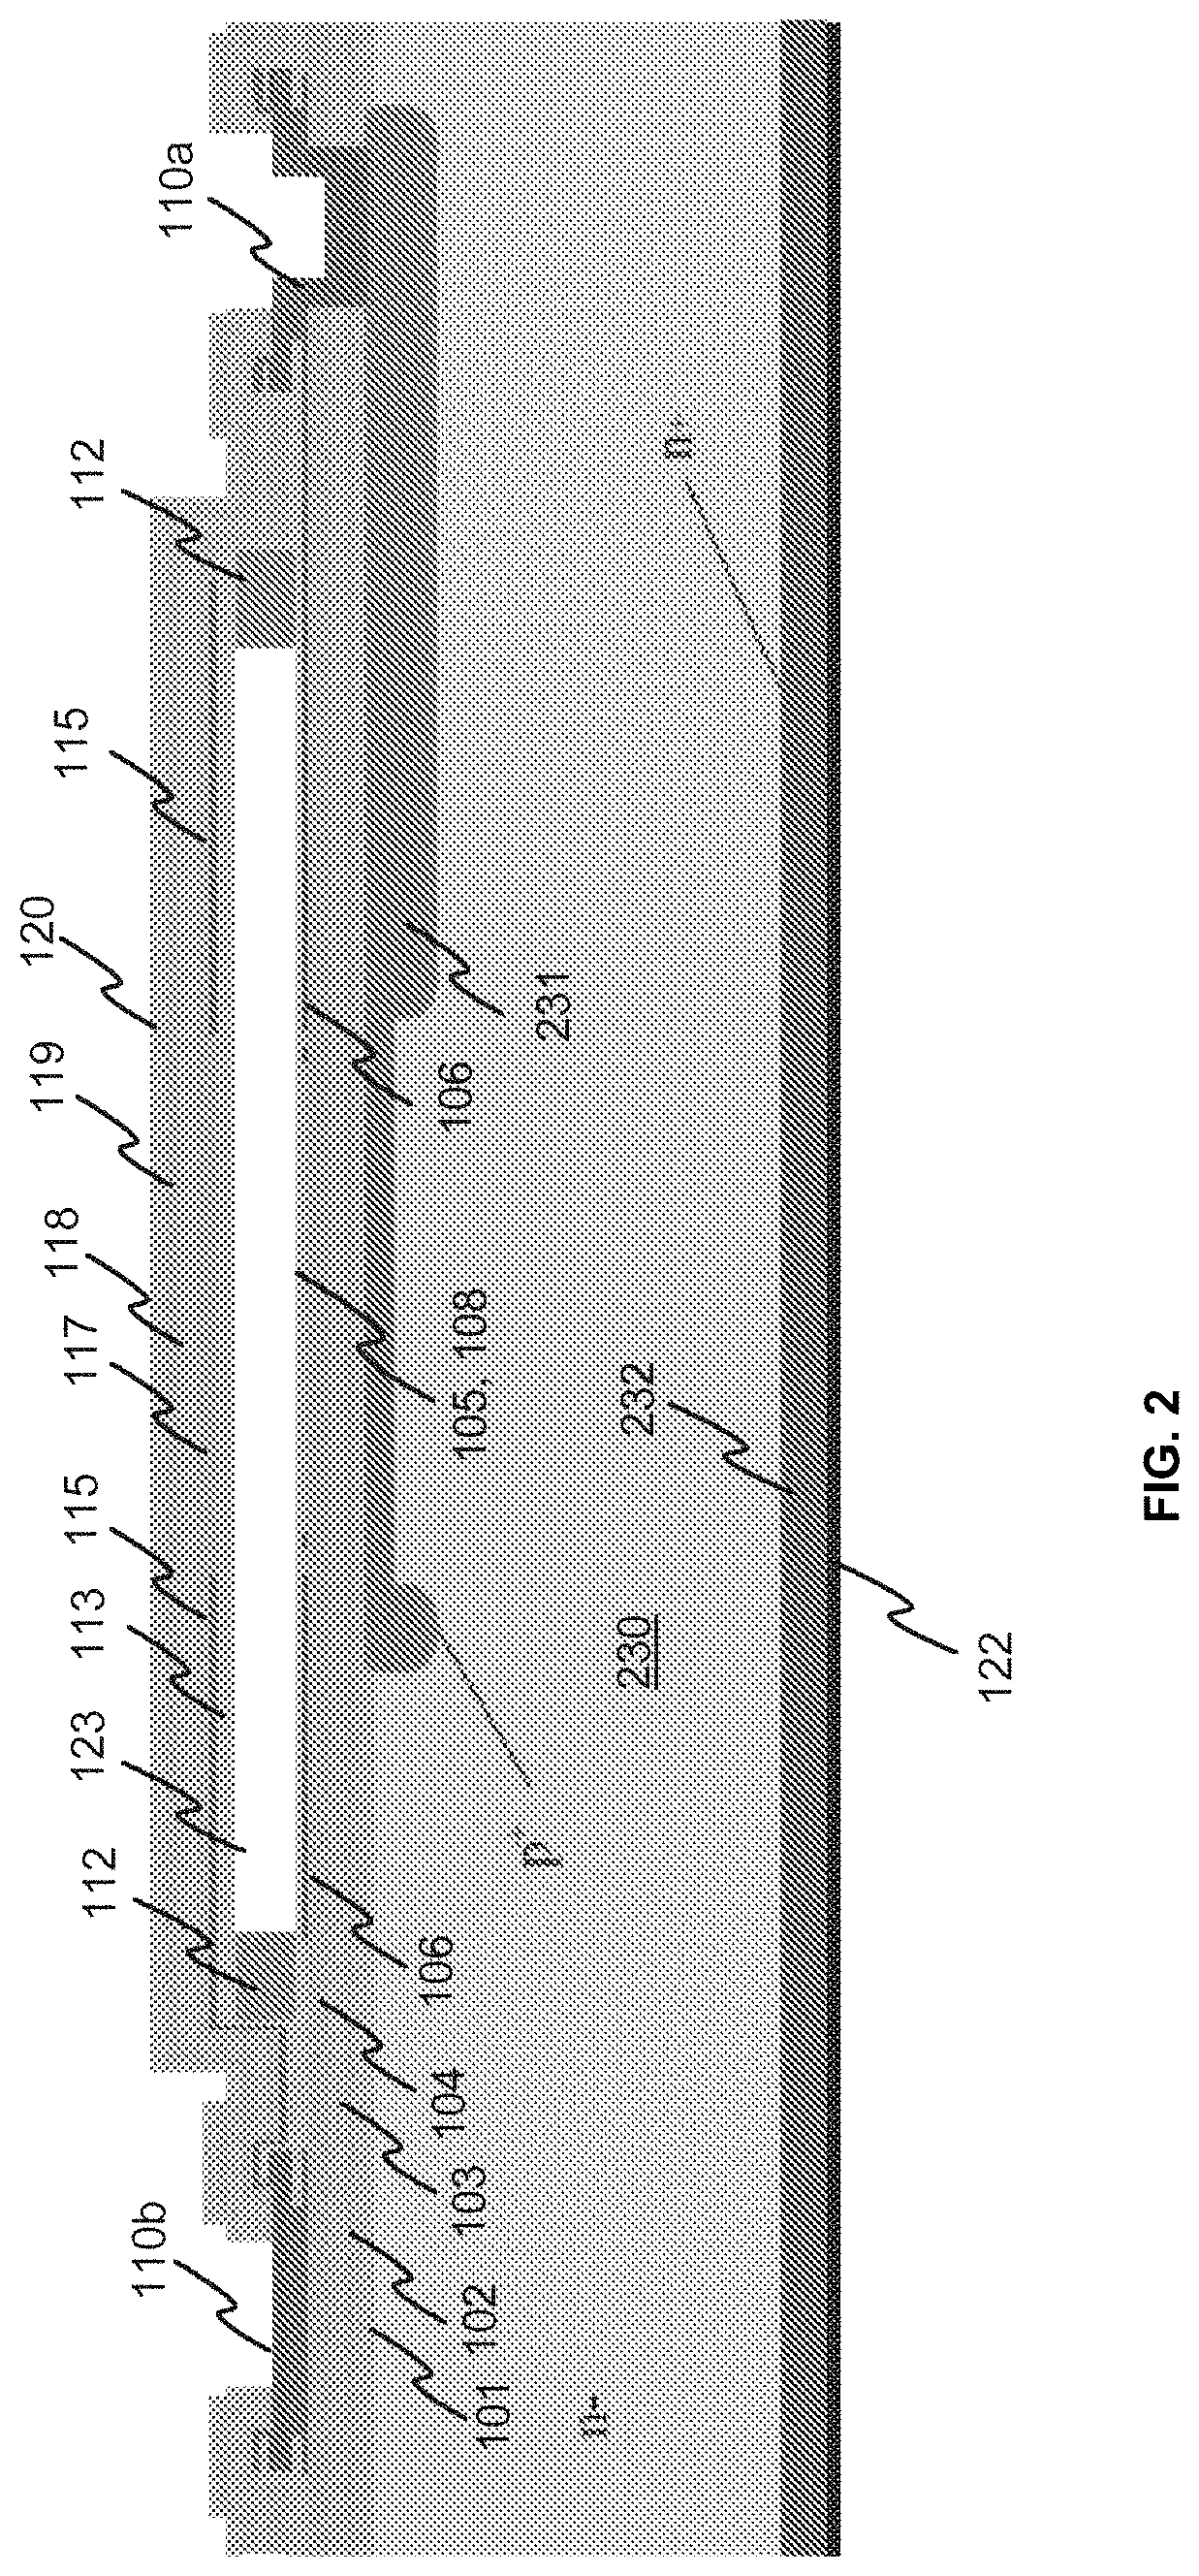 Electrically tunable fabry-perot interferometer, an intermediate product an electrode arrangement and a method for producing an electrically tunable fabry-perot interferometer